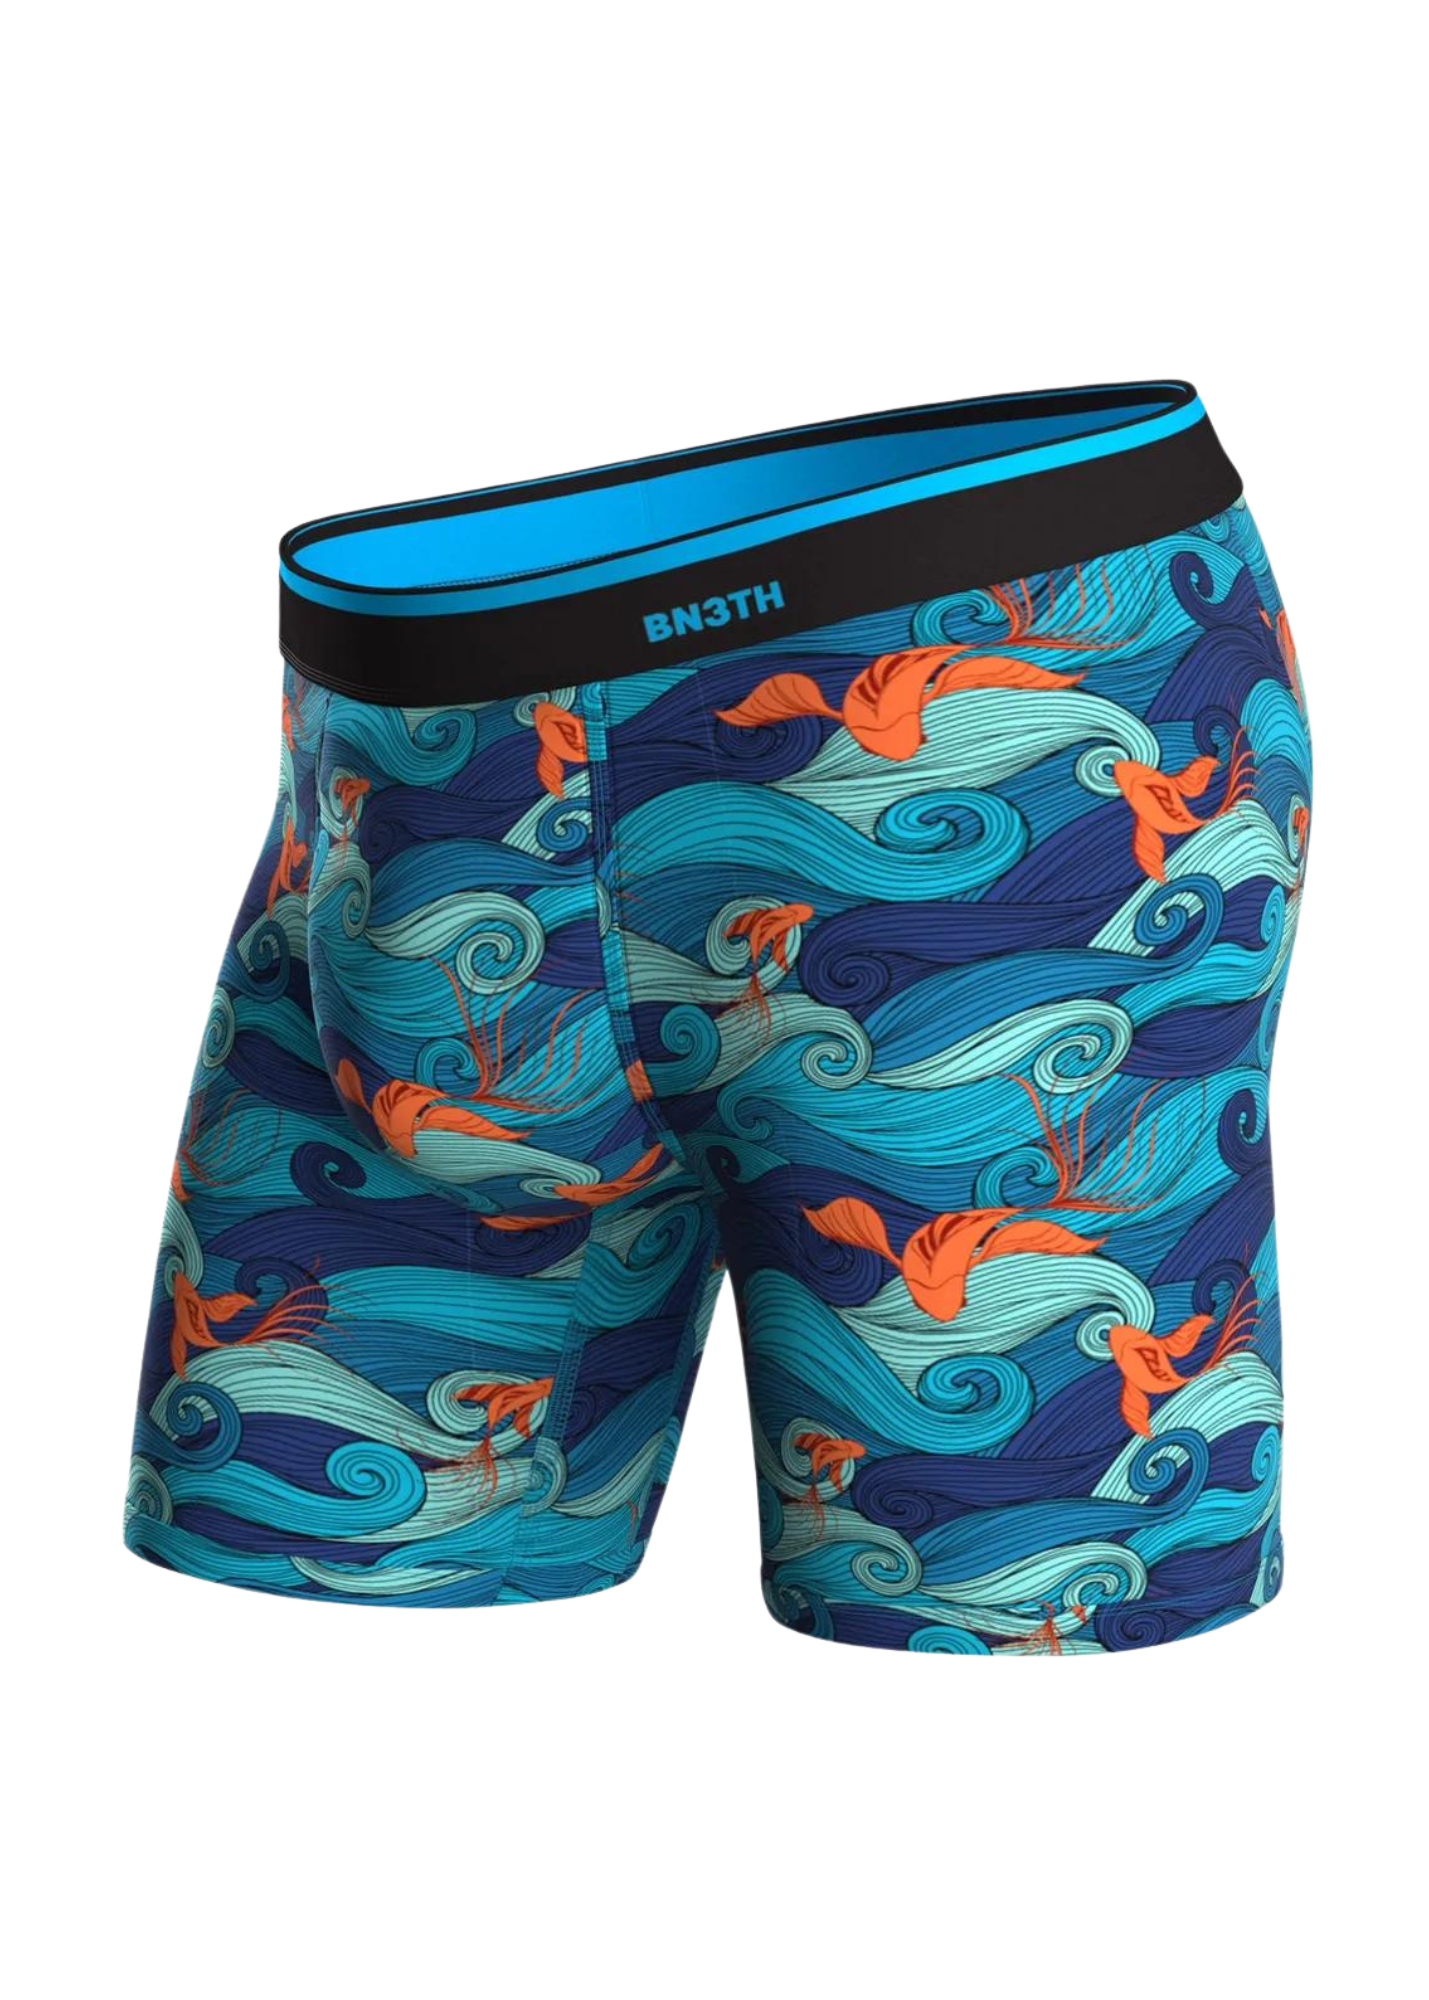 BN3TH Boxer Briefs with Pattern of Waves and Koi Fish